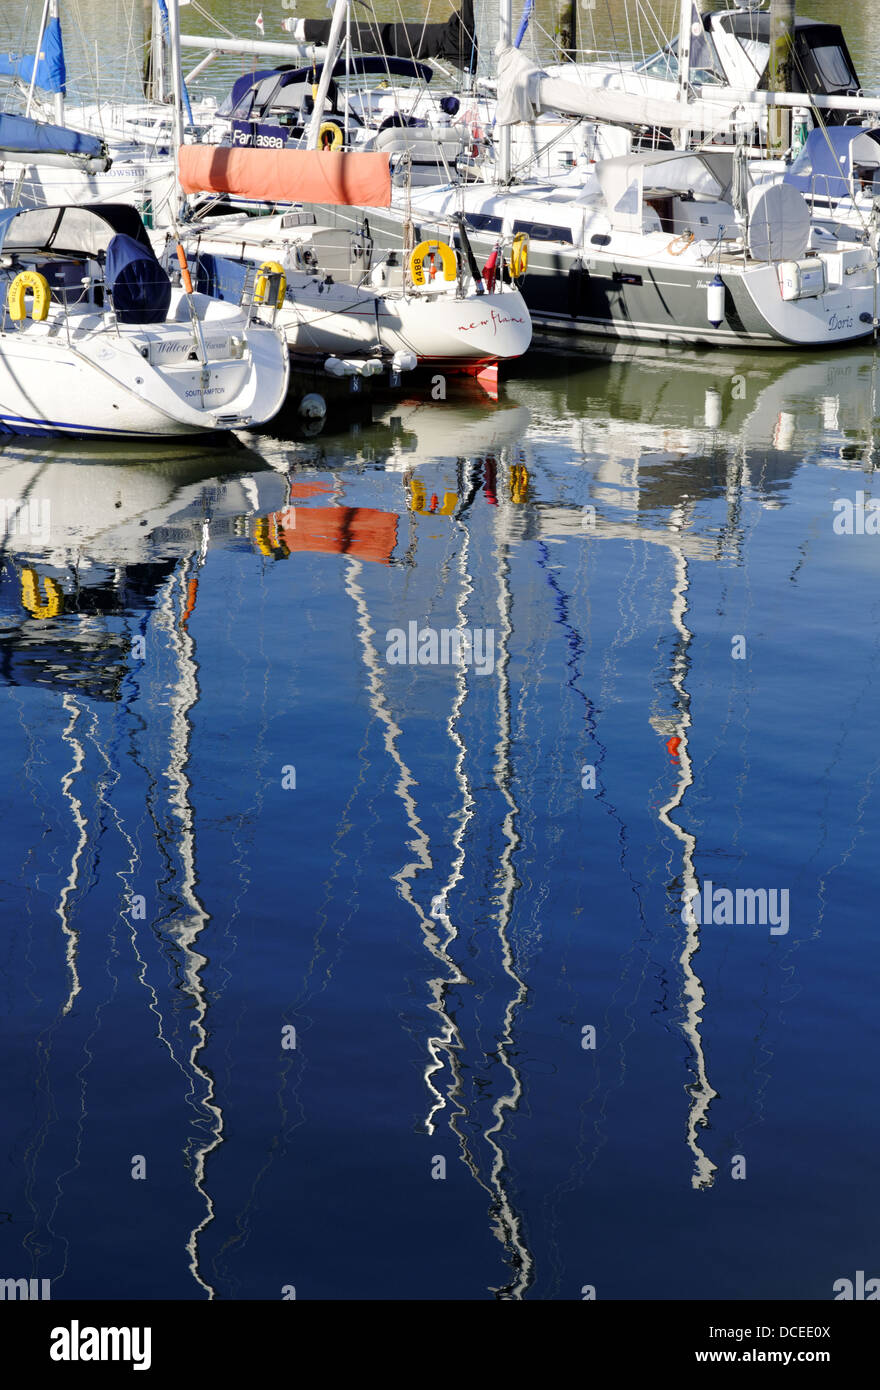 Yachts, East Cowes Marina, East Cowes, Isle of Wight, England, UK,GB. Stock Photo